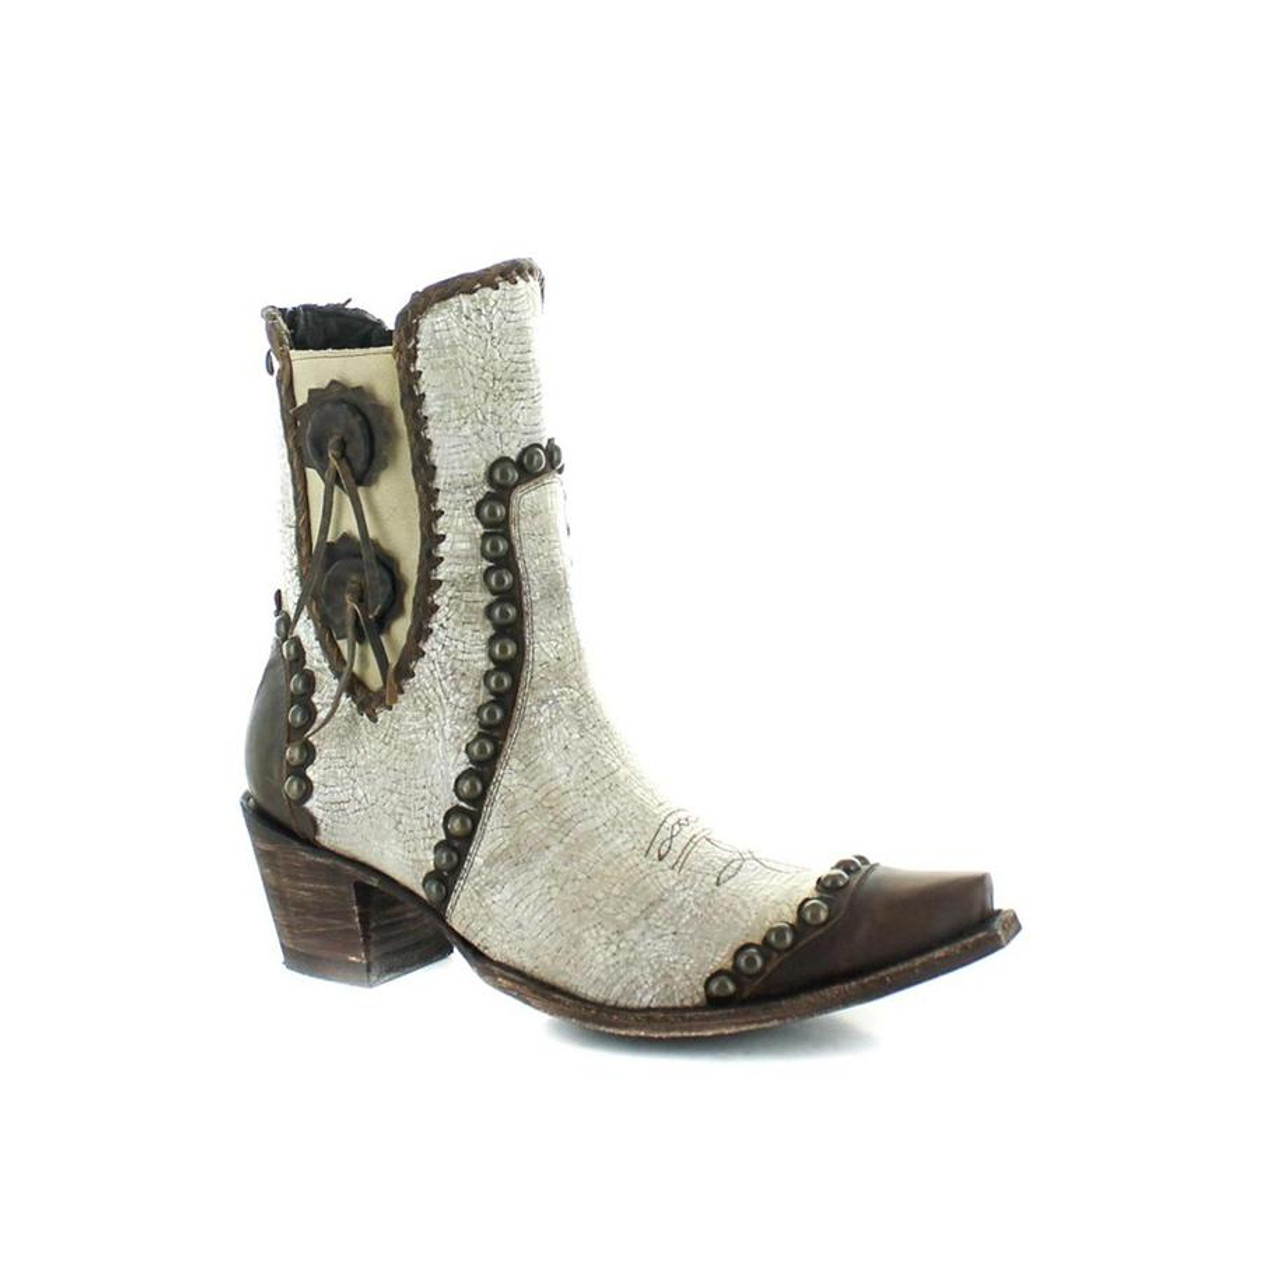 Double D Ranch by Old Gringo Women's Boots - Stockyards - White - Billy ...